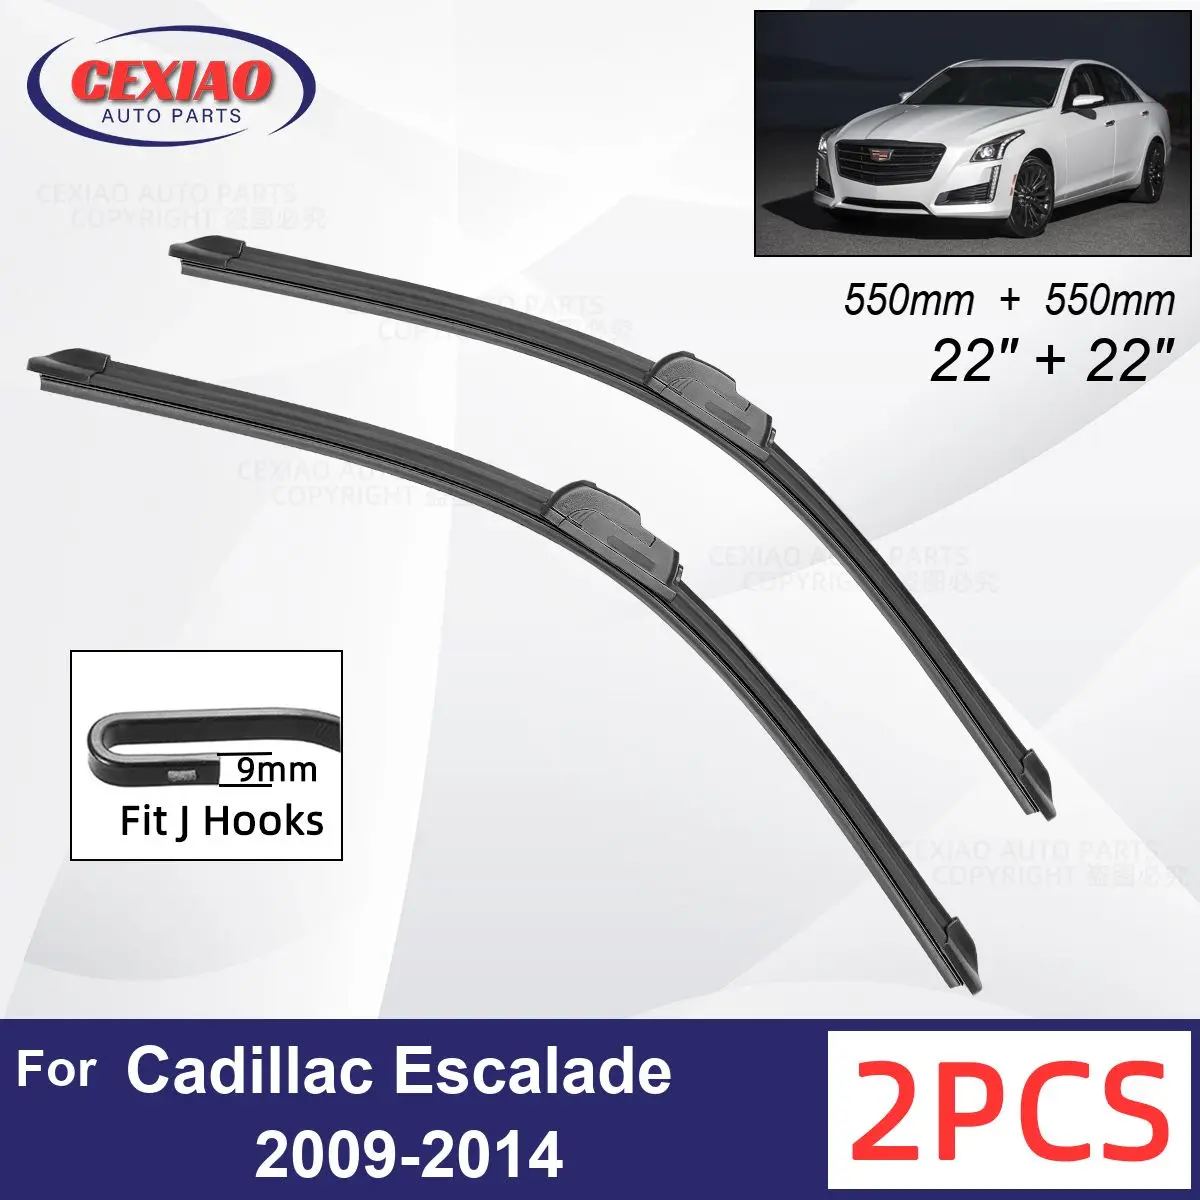 

Car Wiper For Cadillac Escalade 2009-2014 Front Wiper Blades Soft Rubber Windscreen Wipers Auto Windshield 22"+22" 550mm + 550mm